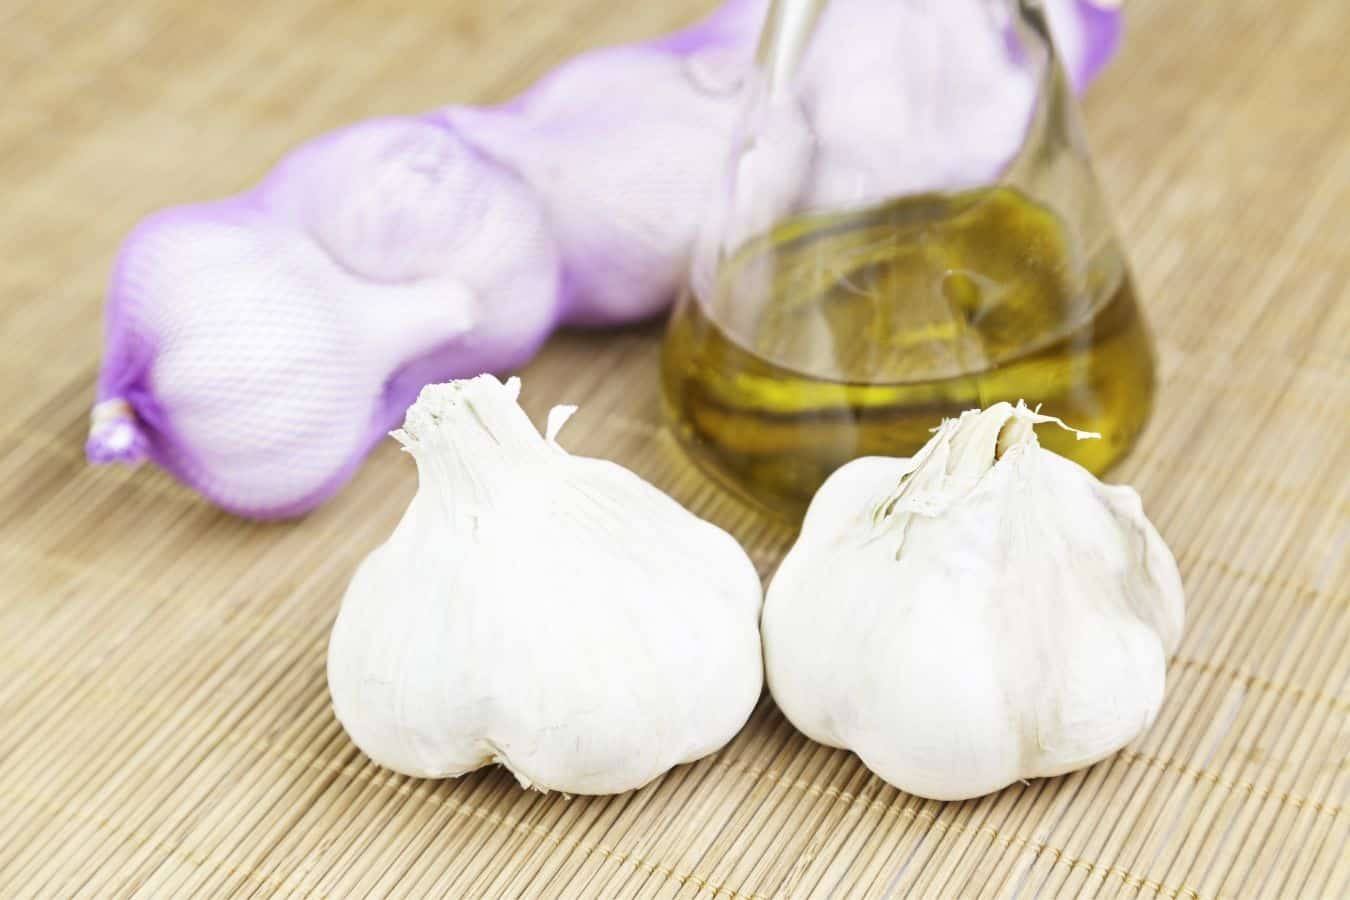 How To Use Onion And Garlic Oil For Hair Growth